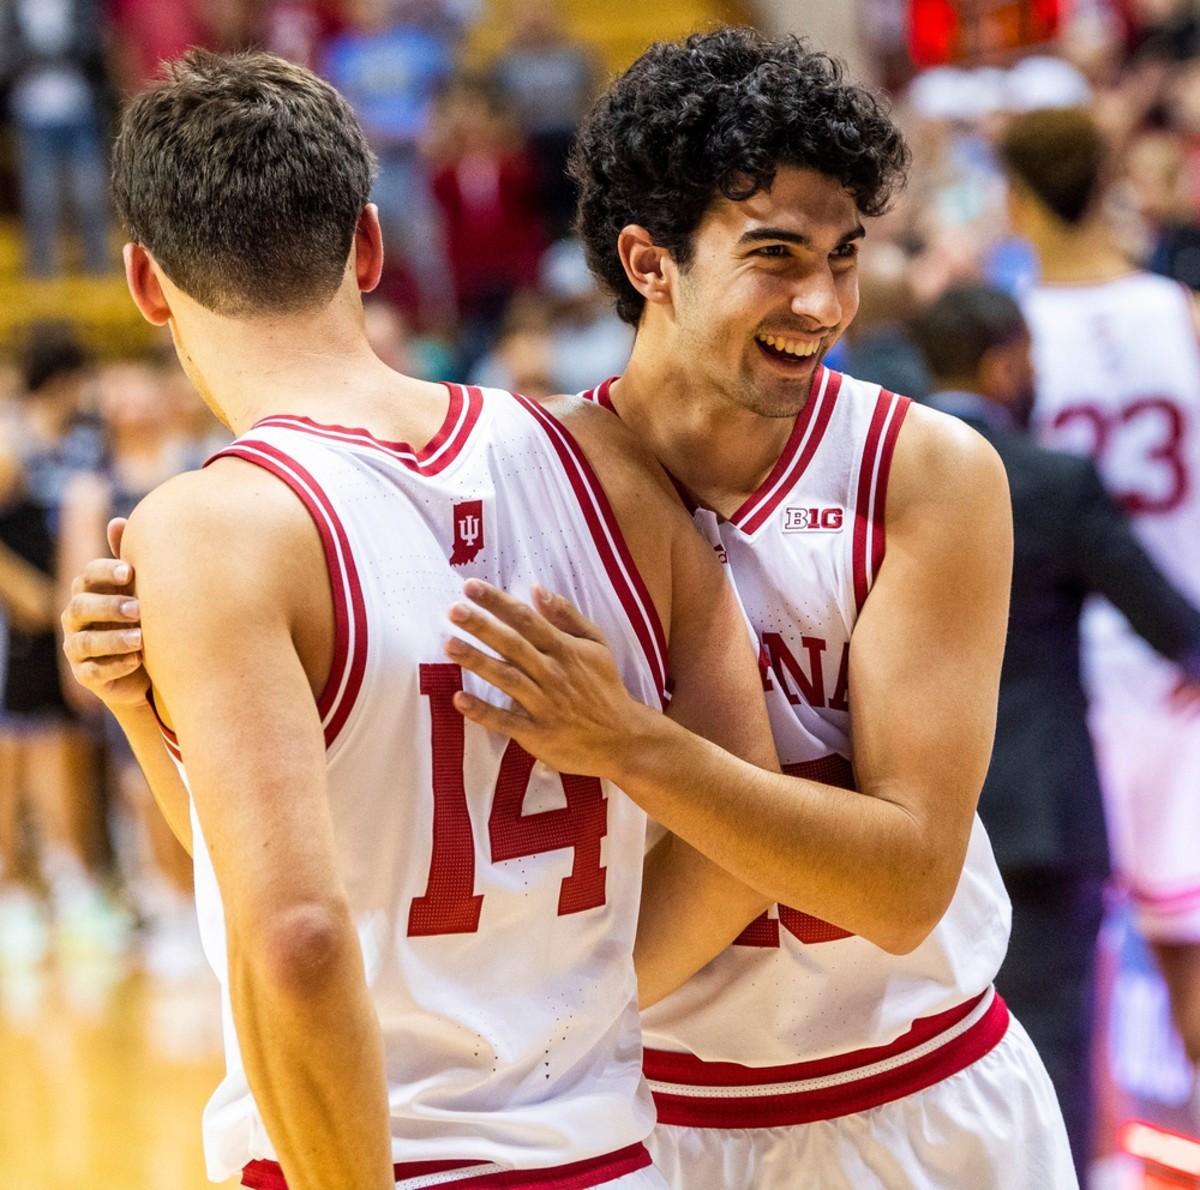 Indiana's Nathan Childress (14) and Shaan Burke (13) enjoy the victory after the Indiana versus St. Francis men's basketball game at Simon Skjodt Assembly Hall on Thursday, Nov. 3, 2022.